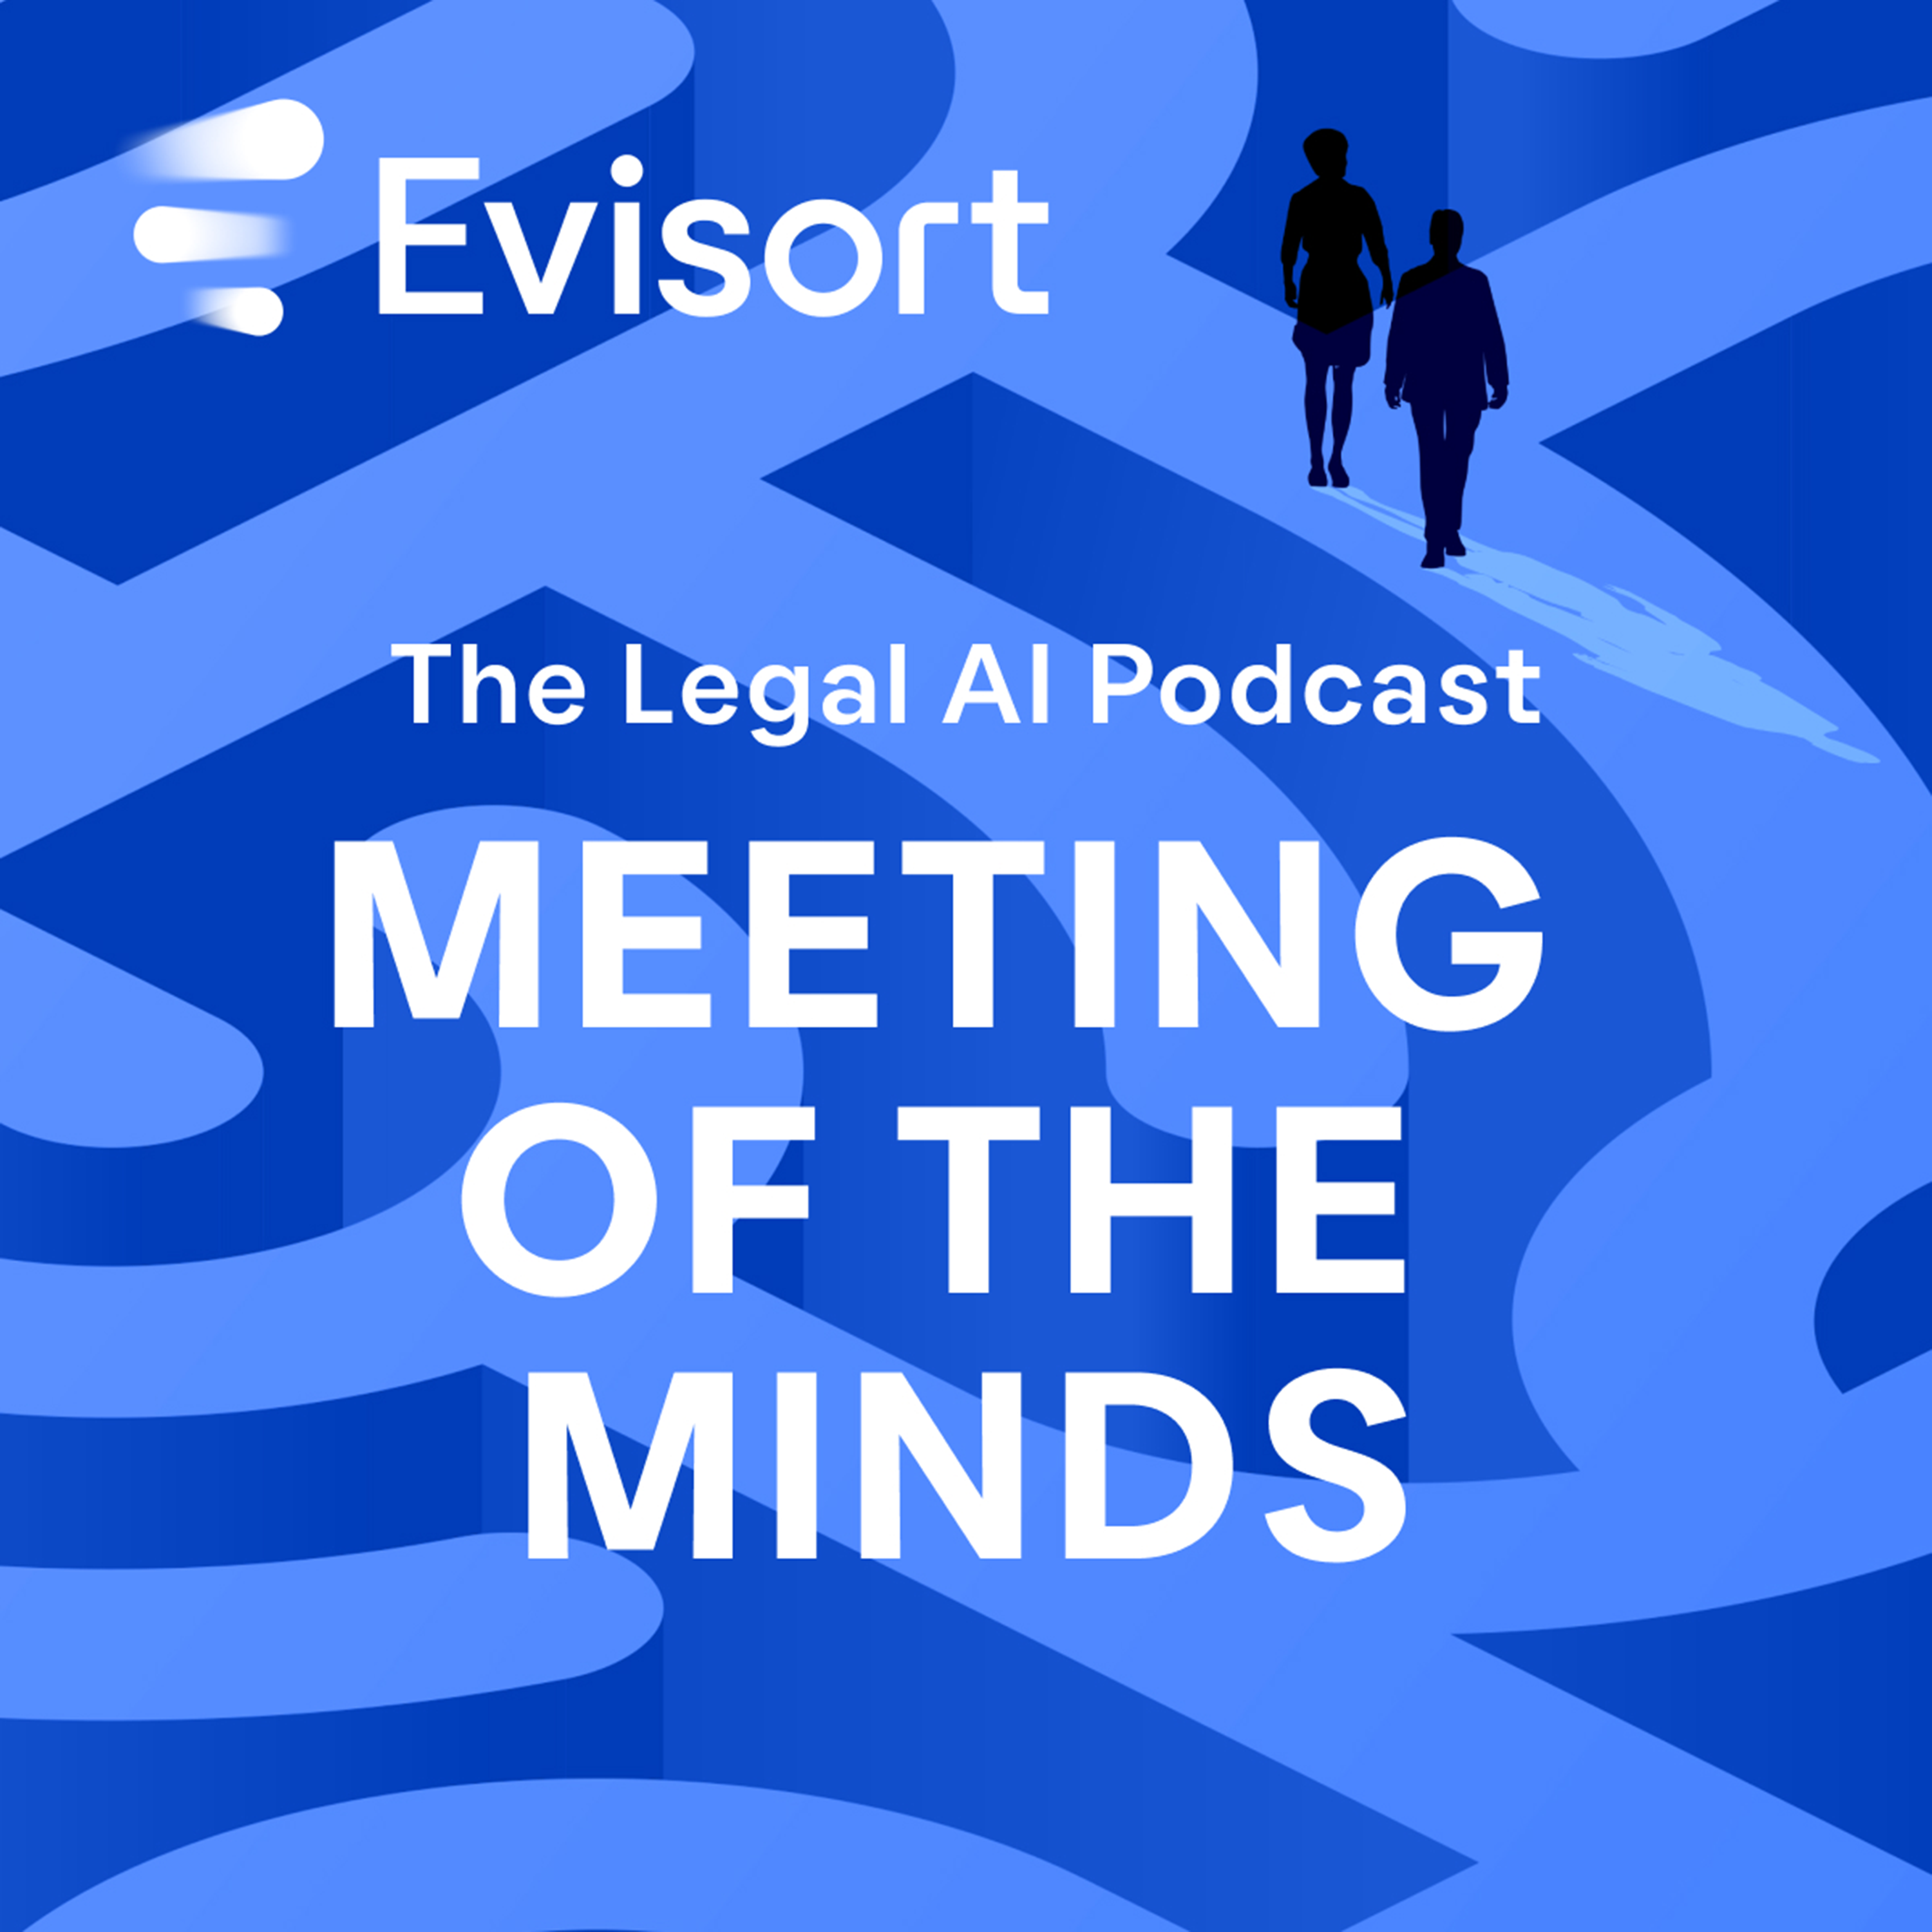 Meeting of the Minds - The Legal AI Podcast